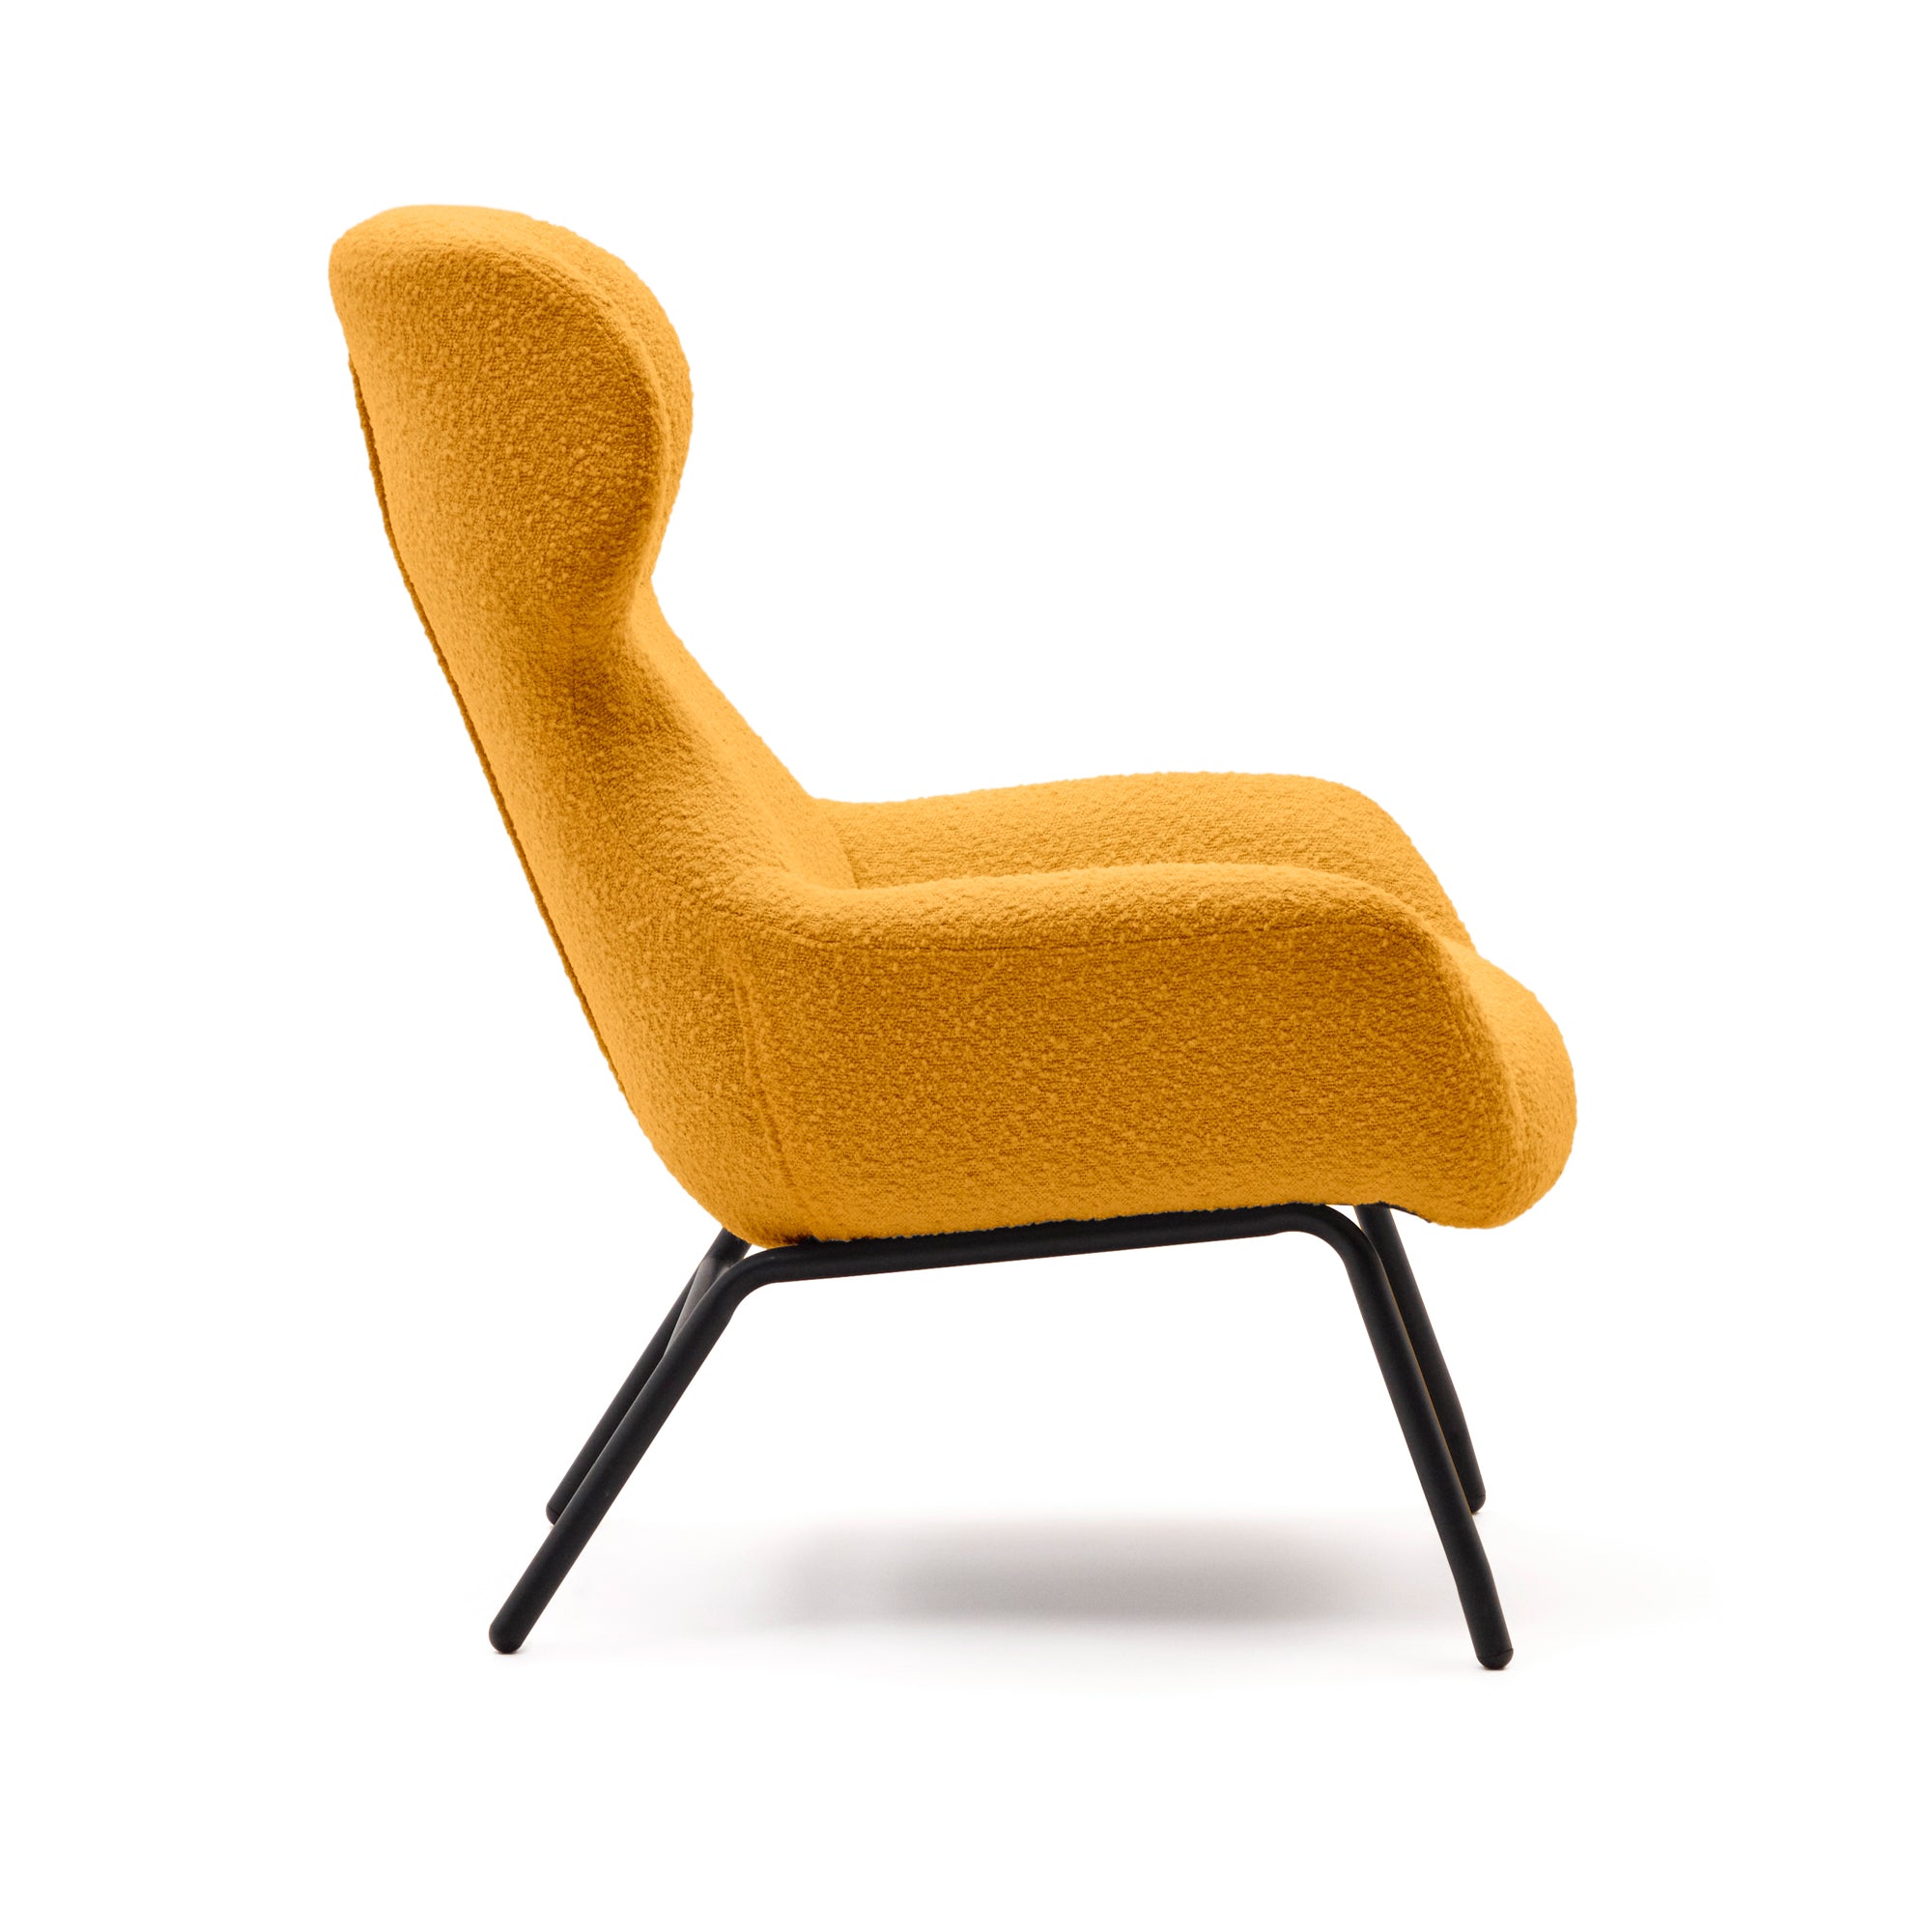 Belina armchair in mustard shearling and steel with black finish